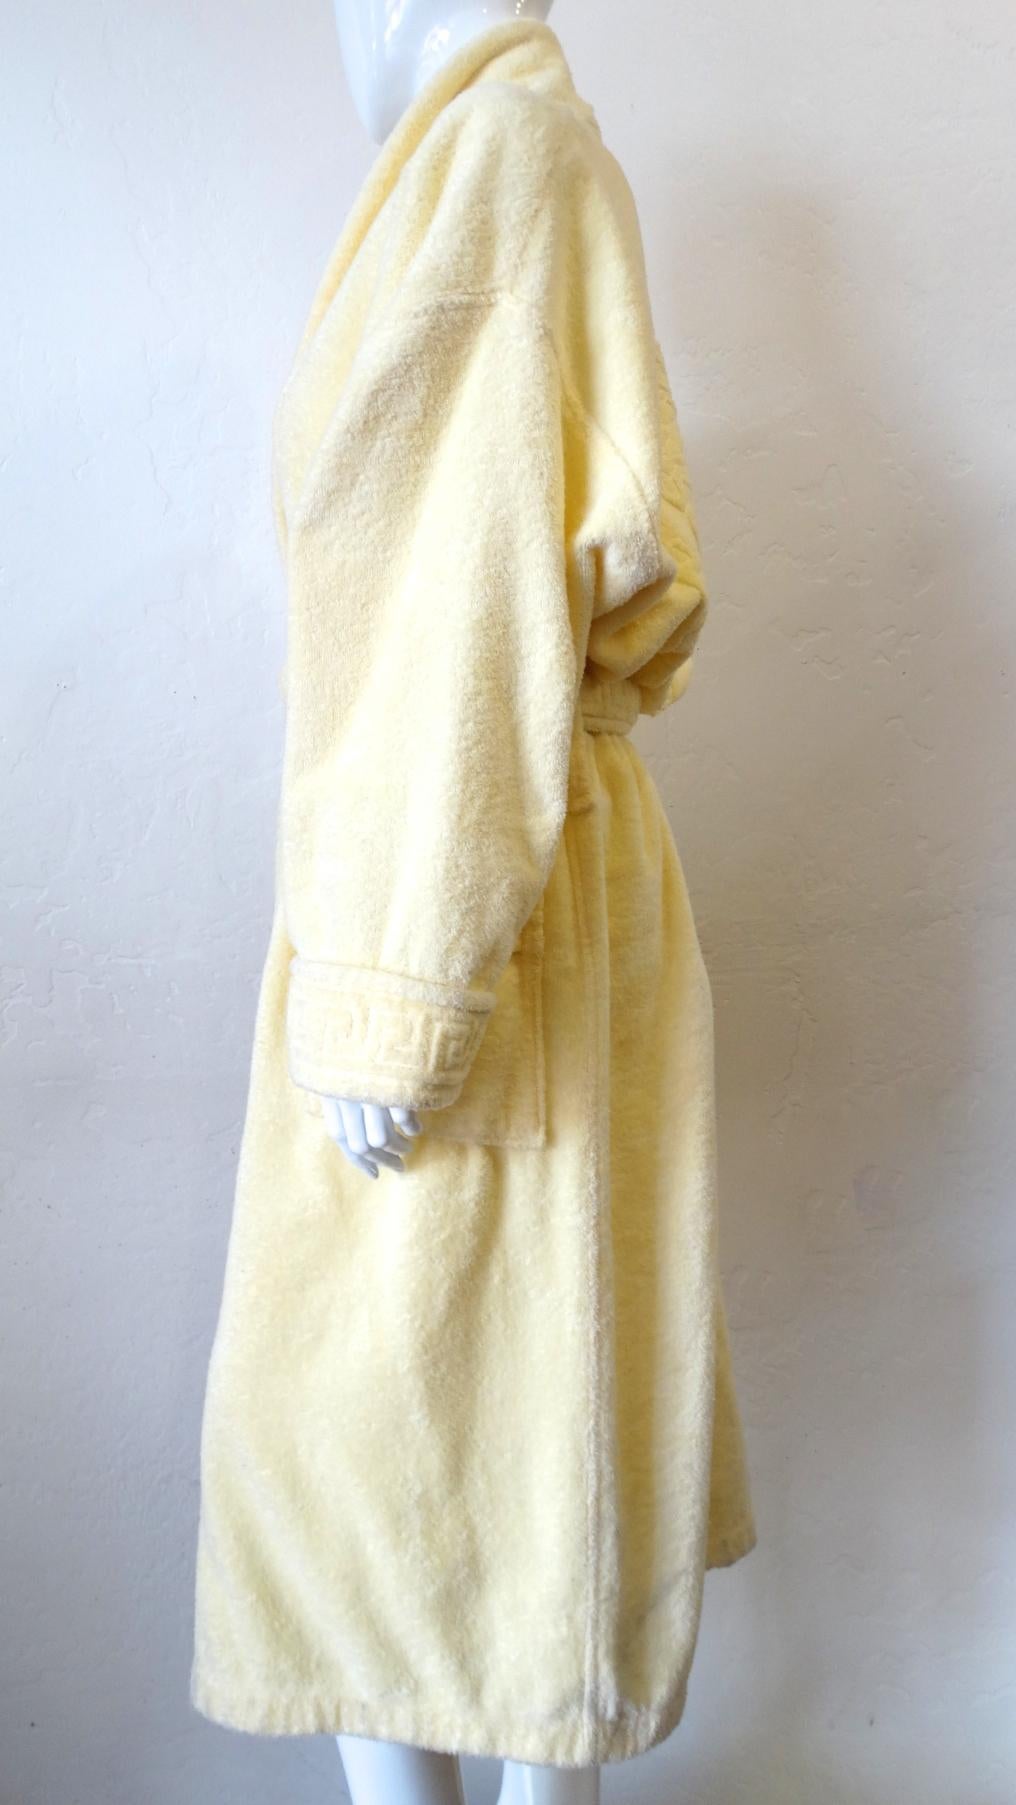 Relax In Style With This Versace Bathrobe! Circa 1990s, this pastel yellow billowy bathrobe features the iconic Medusa head on the back and the signature Greek keys along the trim of the sleeves, top of the two front pocket and the tie. The perfect